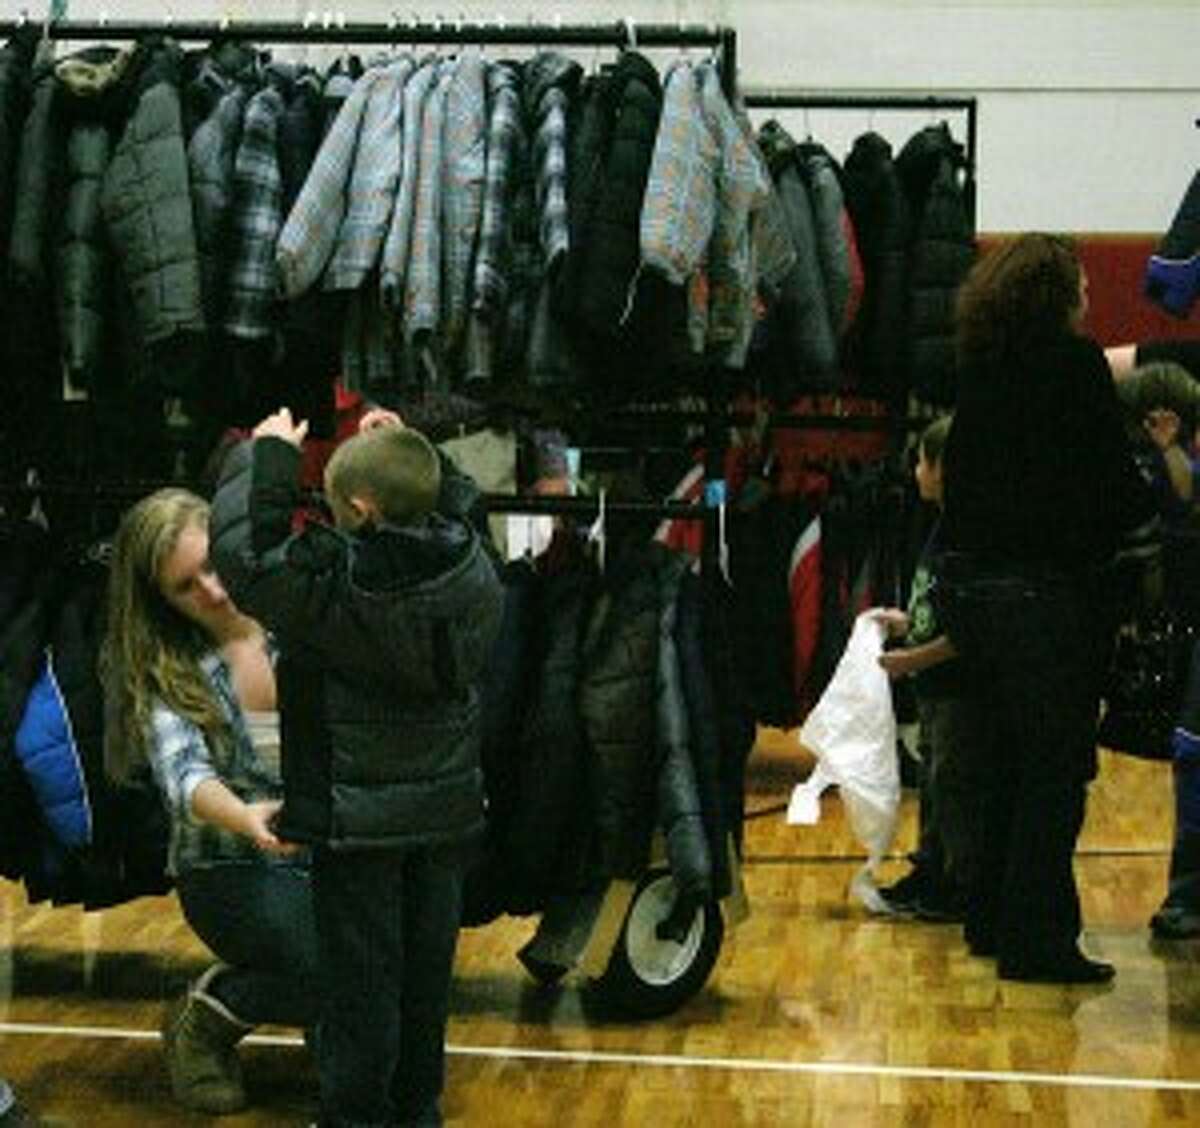 SUITING UP: A volunteer helps a student try on a new coat at the drive. (Photo/Bryan Warrick)